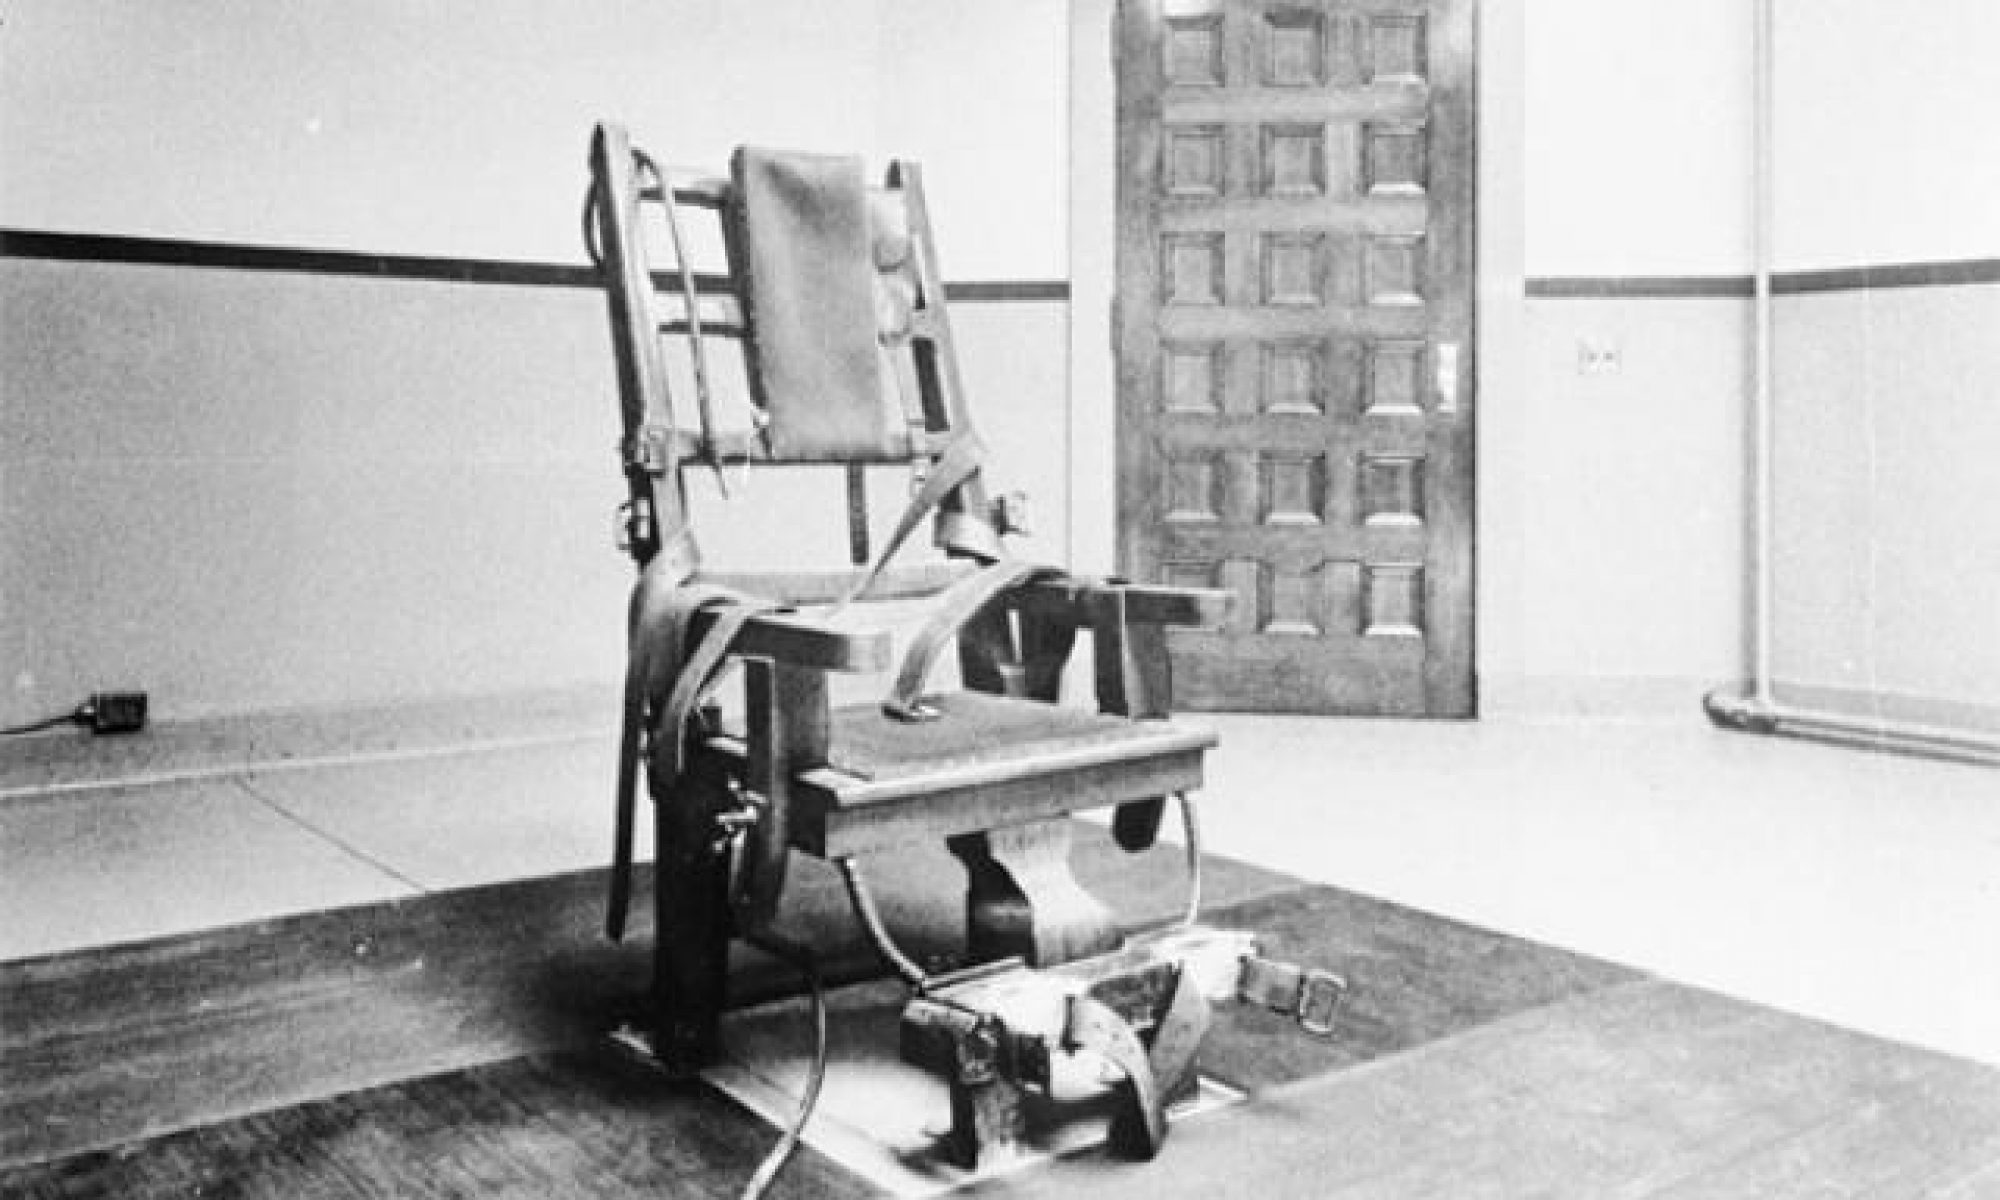 Sparky’s Revenge; South Carolina considers reinstating the electric chair.